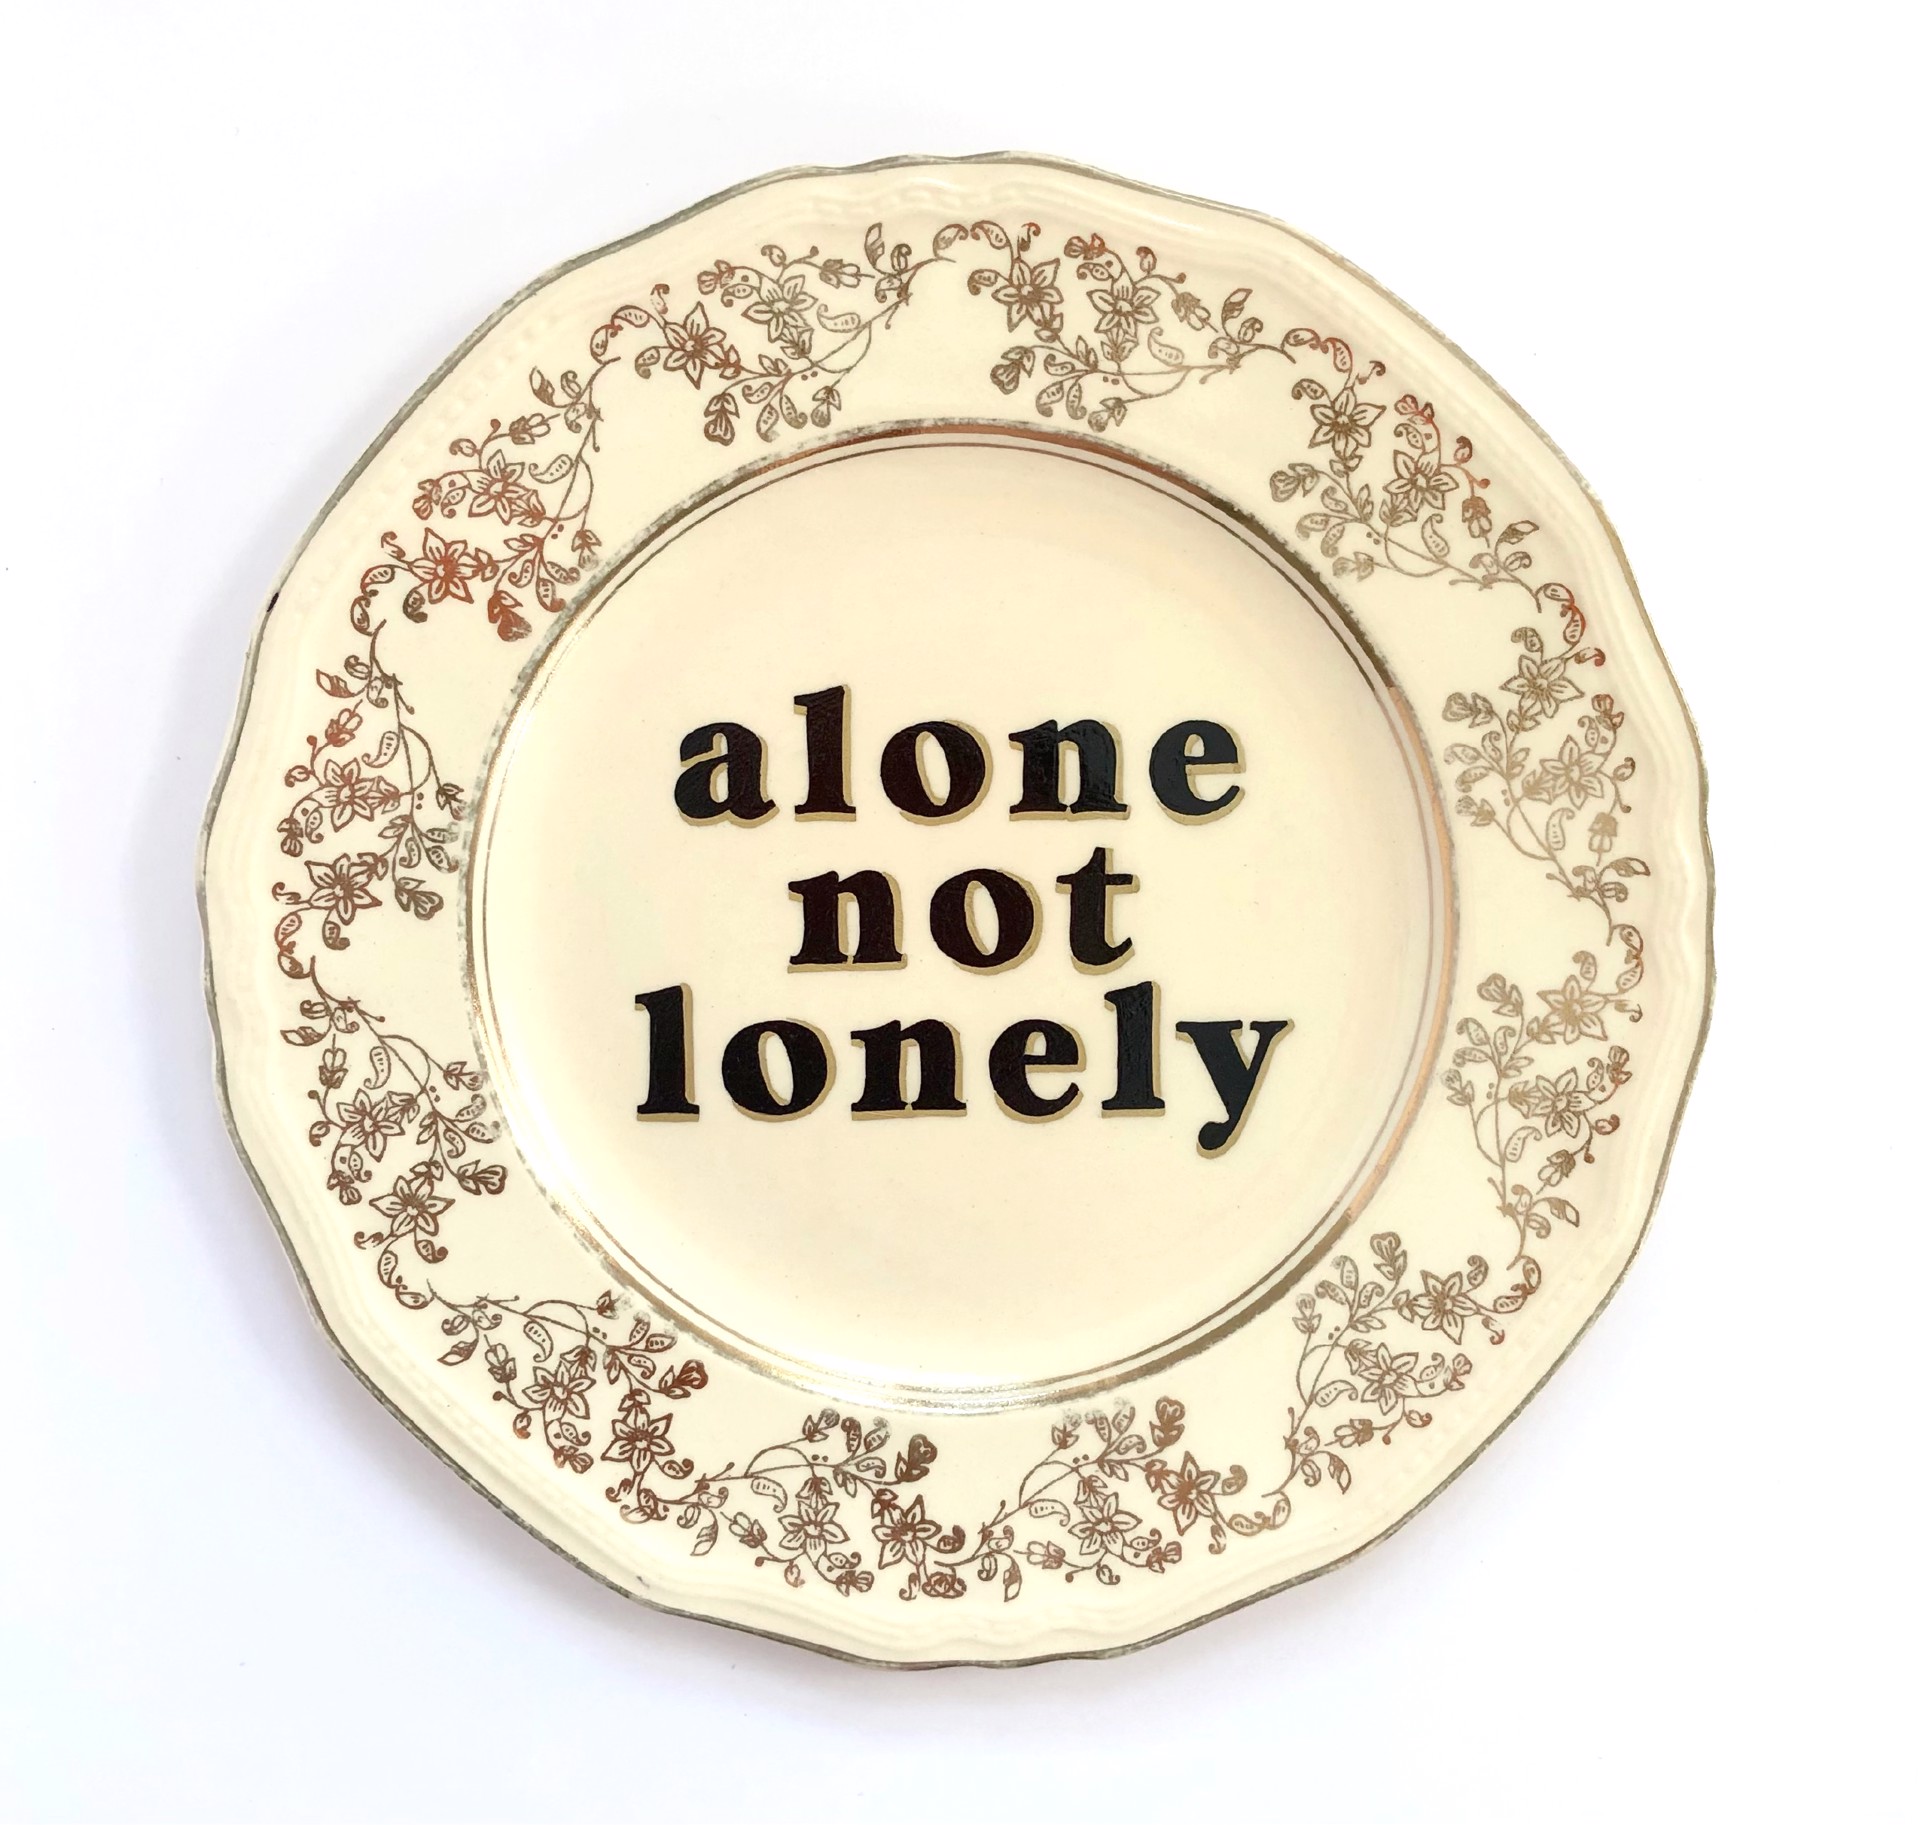 Alone not lonely by Marie-Claude Marquis